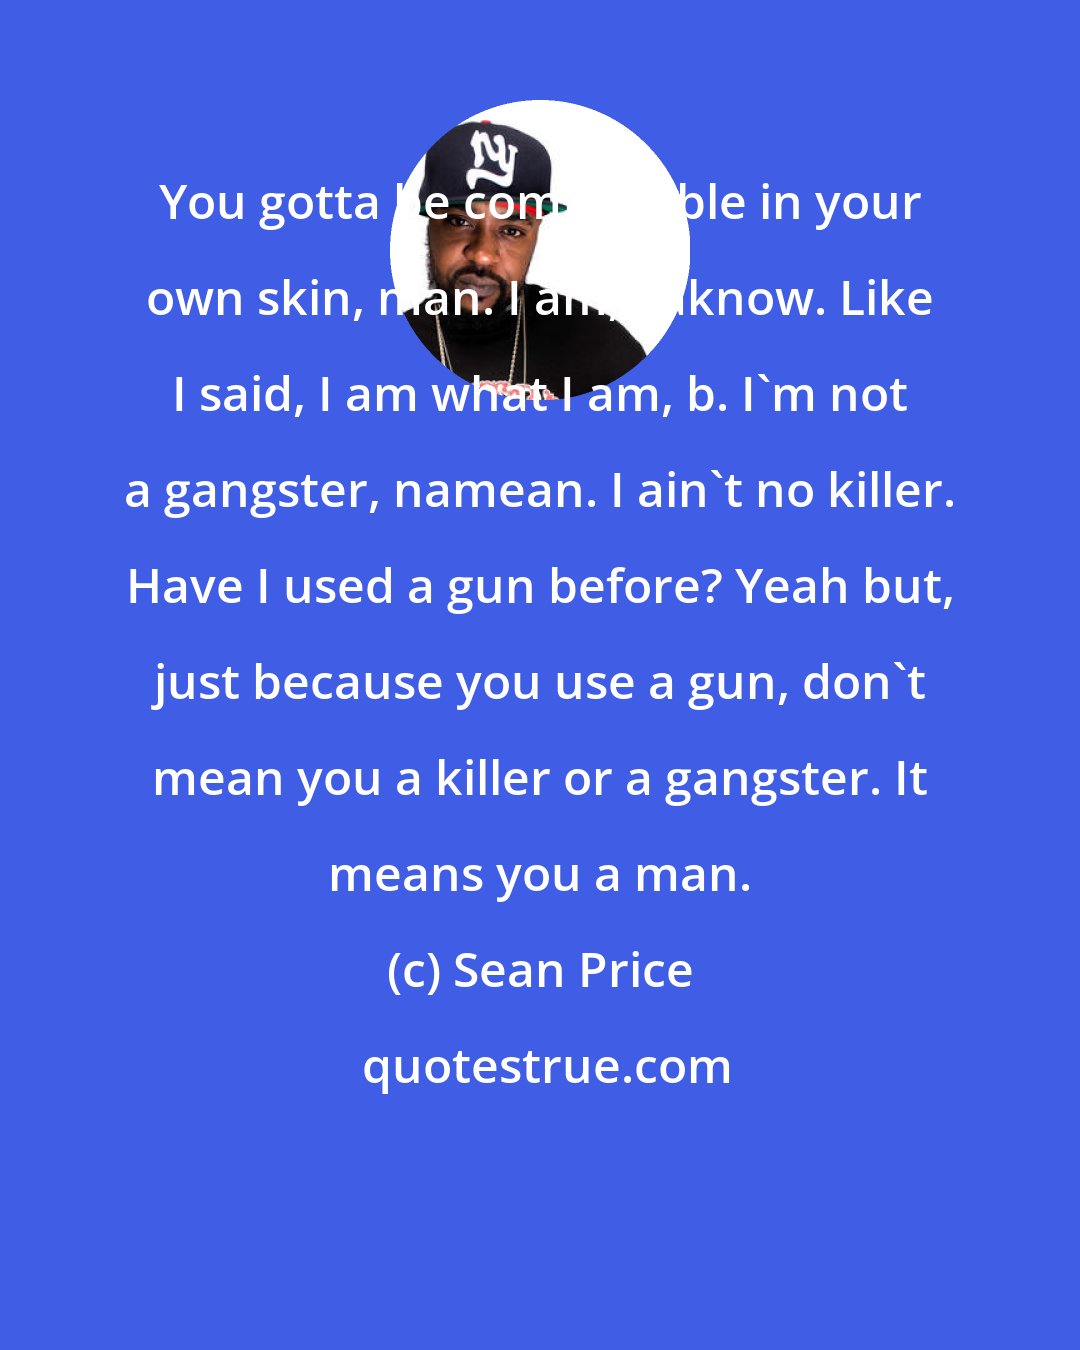 Sean Price: You gotta be comfortable in your own skin, man. I am, yaknow. Like I said, I am what I am, b. I'm not a gangster, namean. I ain't no killer. Have I used a gun before? Yeah but, just because you use a gun, don't mean you a killer or a gangster. It means you a man.